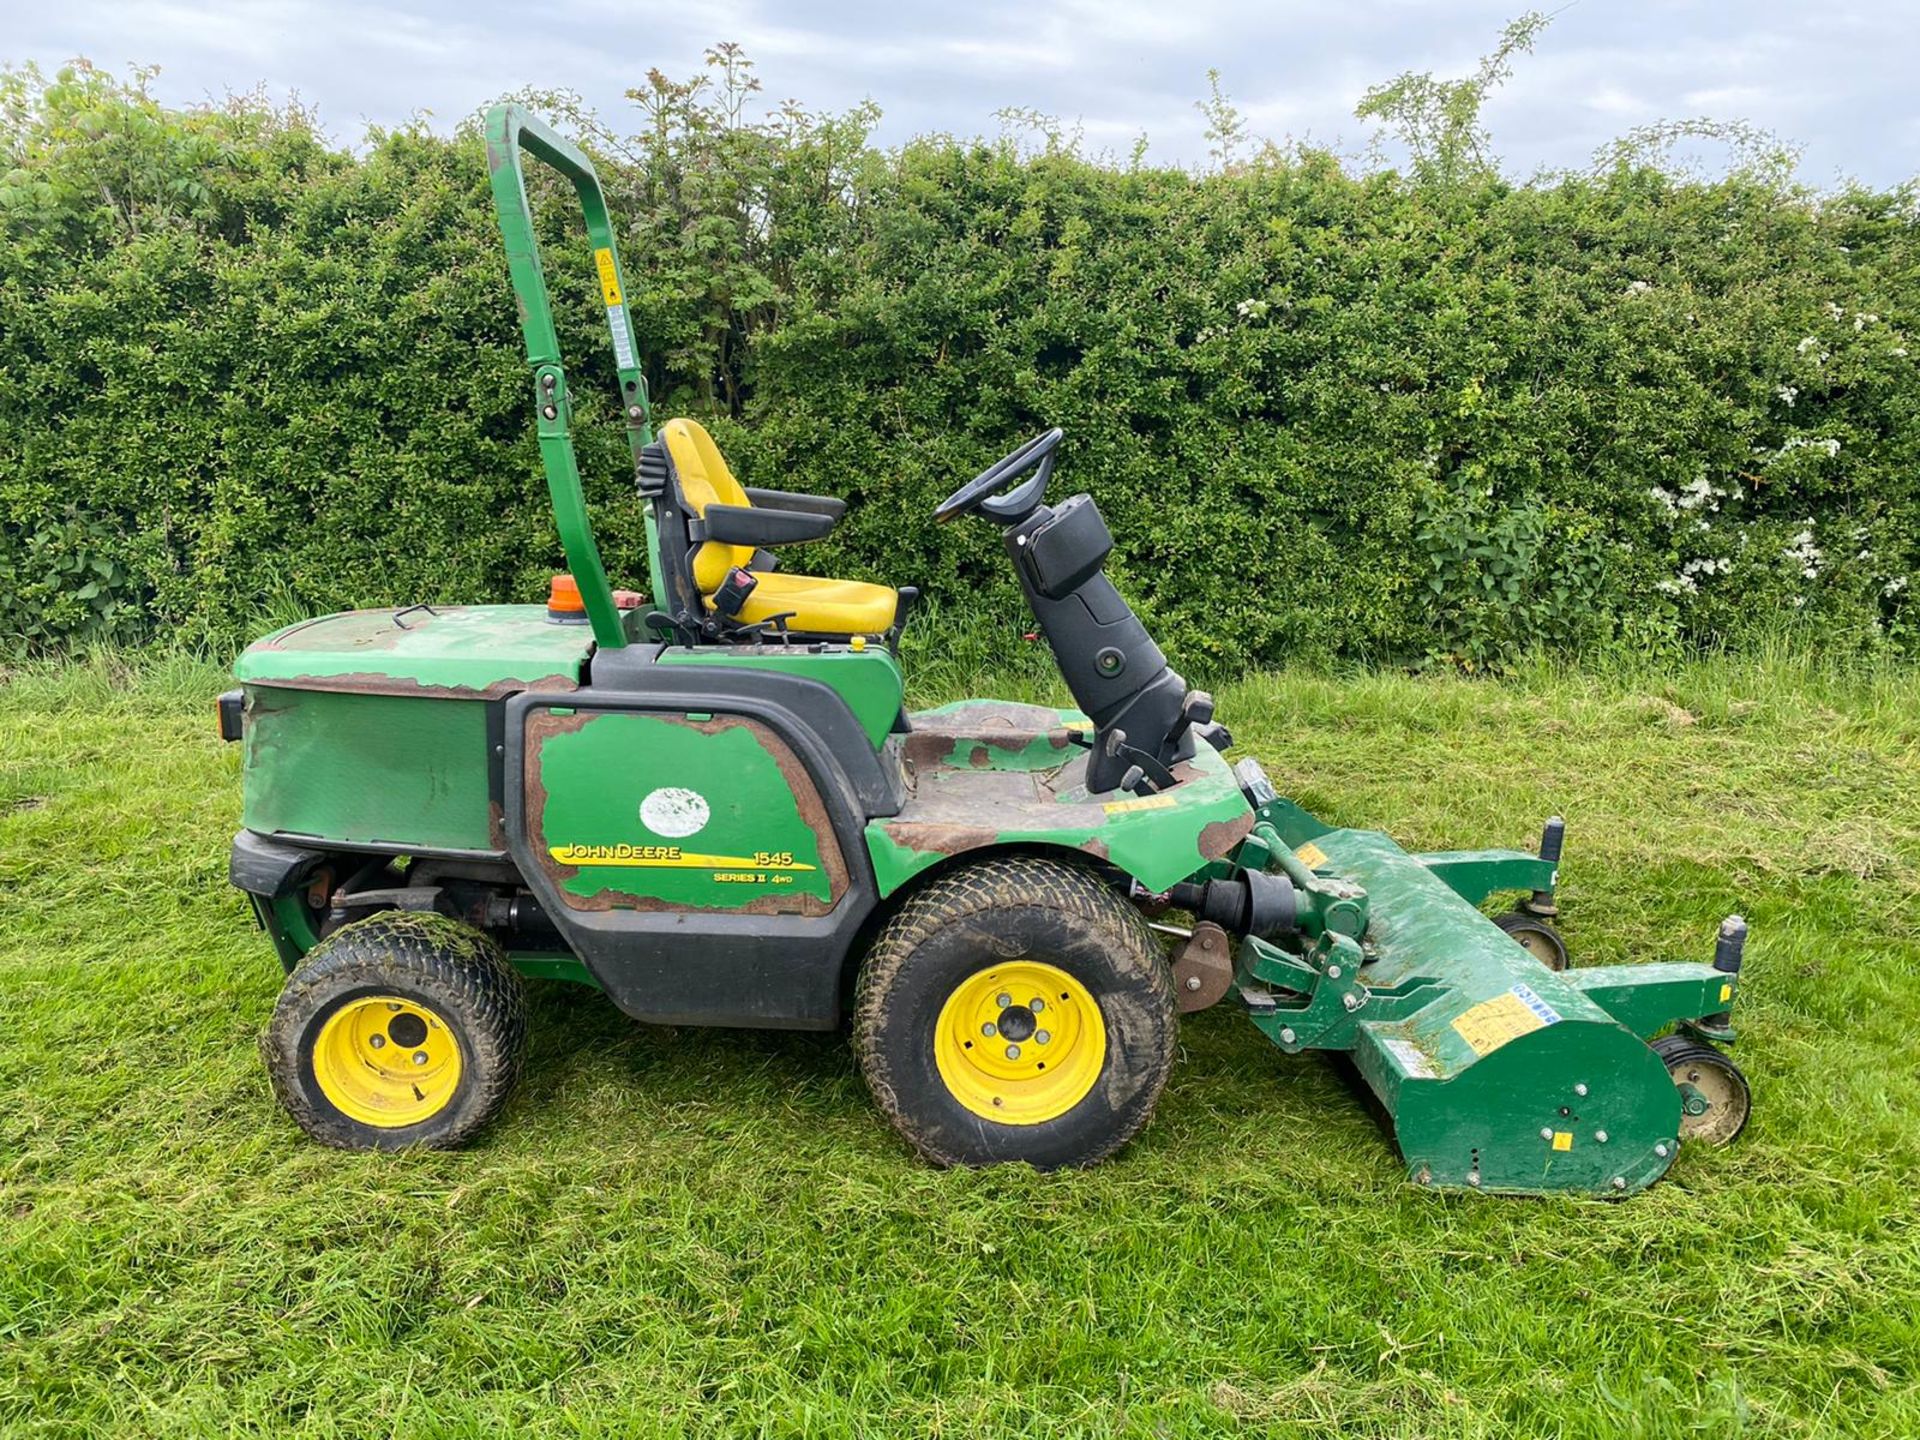 2012 JOHN DEERE 1545 OUT FRONT FLAIL MOWER LOCATION NORTH YORKSHIRE